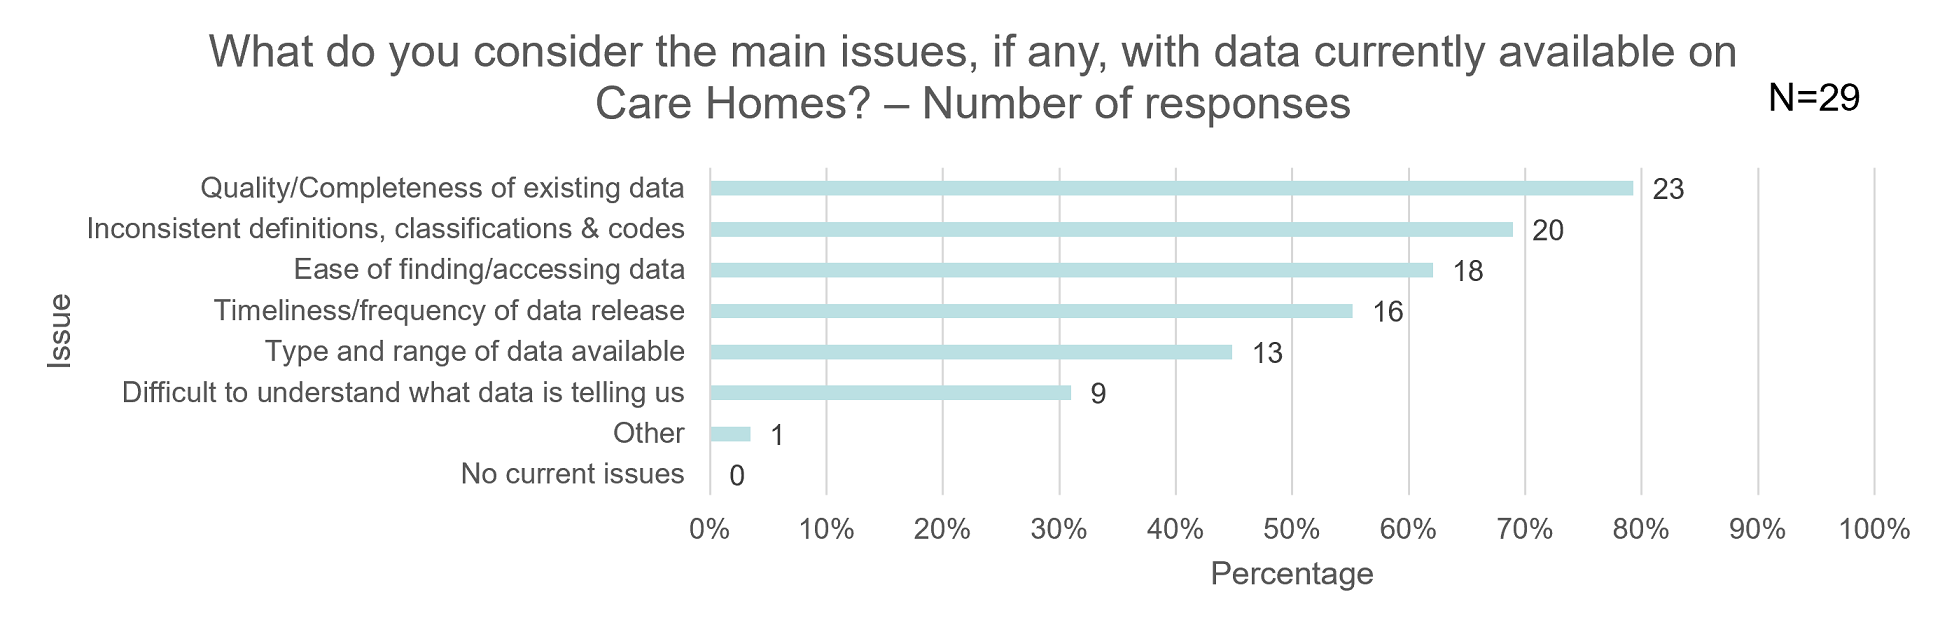 This chart shows issues with the data respondents use (if they have any). It shows the percentage of respondents and the raw number of responses next to each row. The results are as follows: Quality/Completeness of existing data 23 responses, Inconsistent definitions, classifications and code 20 responses, Ease of finding/accessing data 18 responses, Timeliness/frequency of data release 16 responses, Type and range of data available 13 responses, Difficult to understand what data is telling us 9 responses, Other 1 responses, No current issues 0 responses.